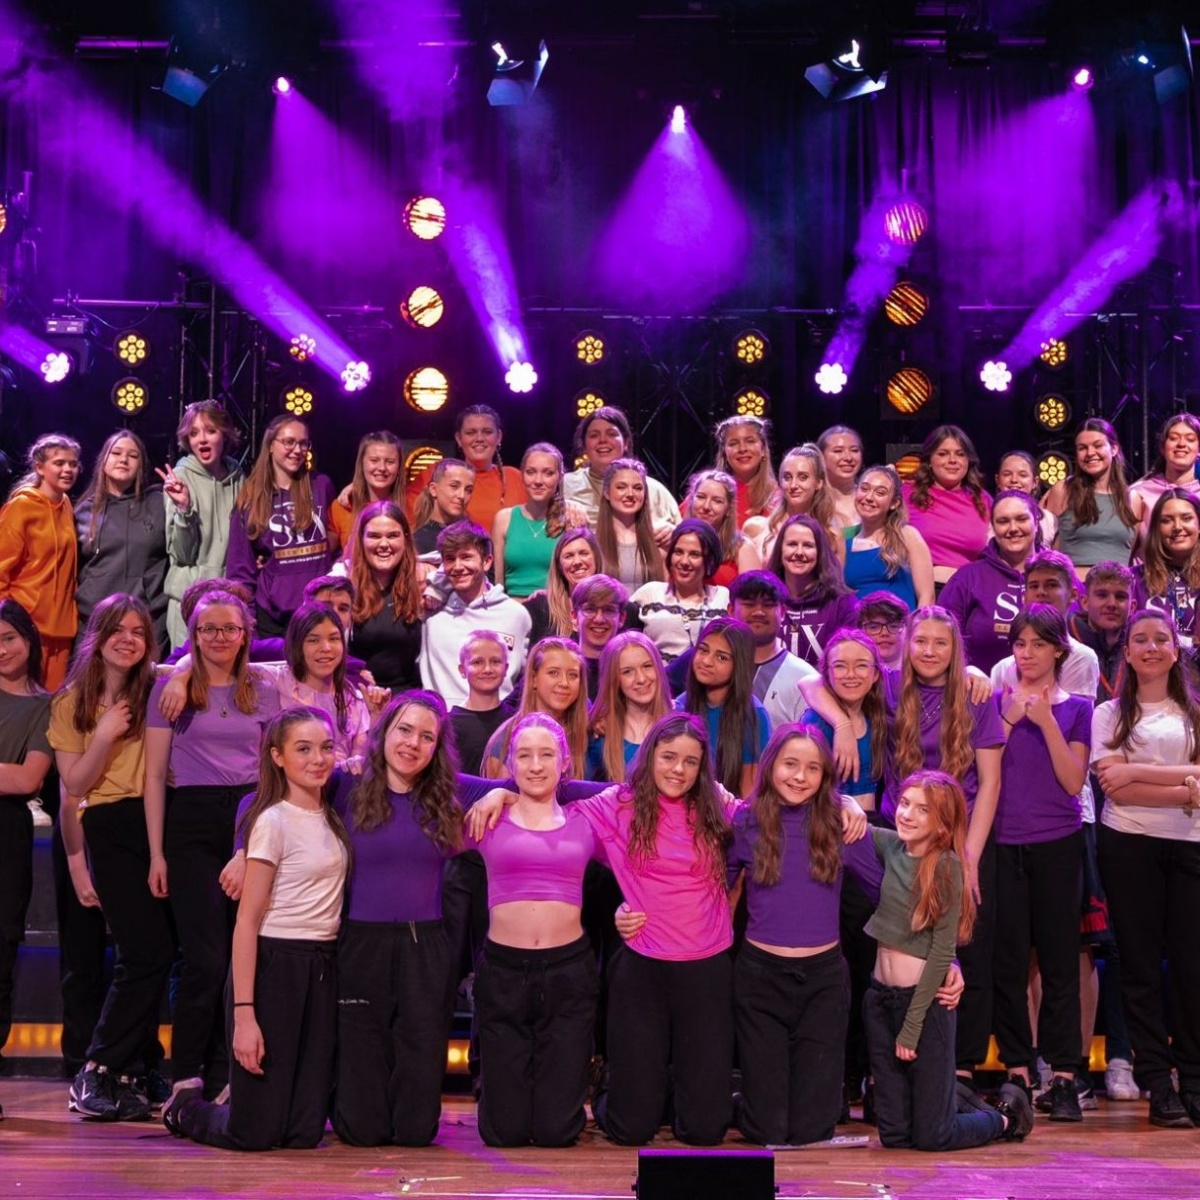 Collingwood College Spectacular 'Six' Wows Audiences